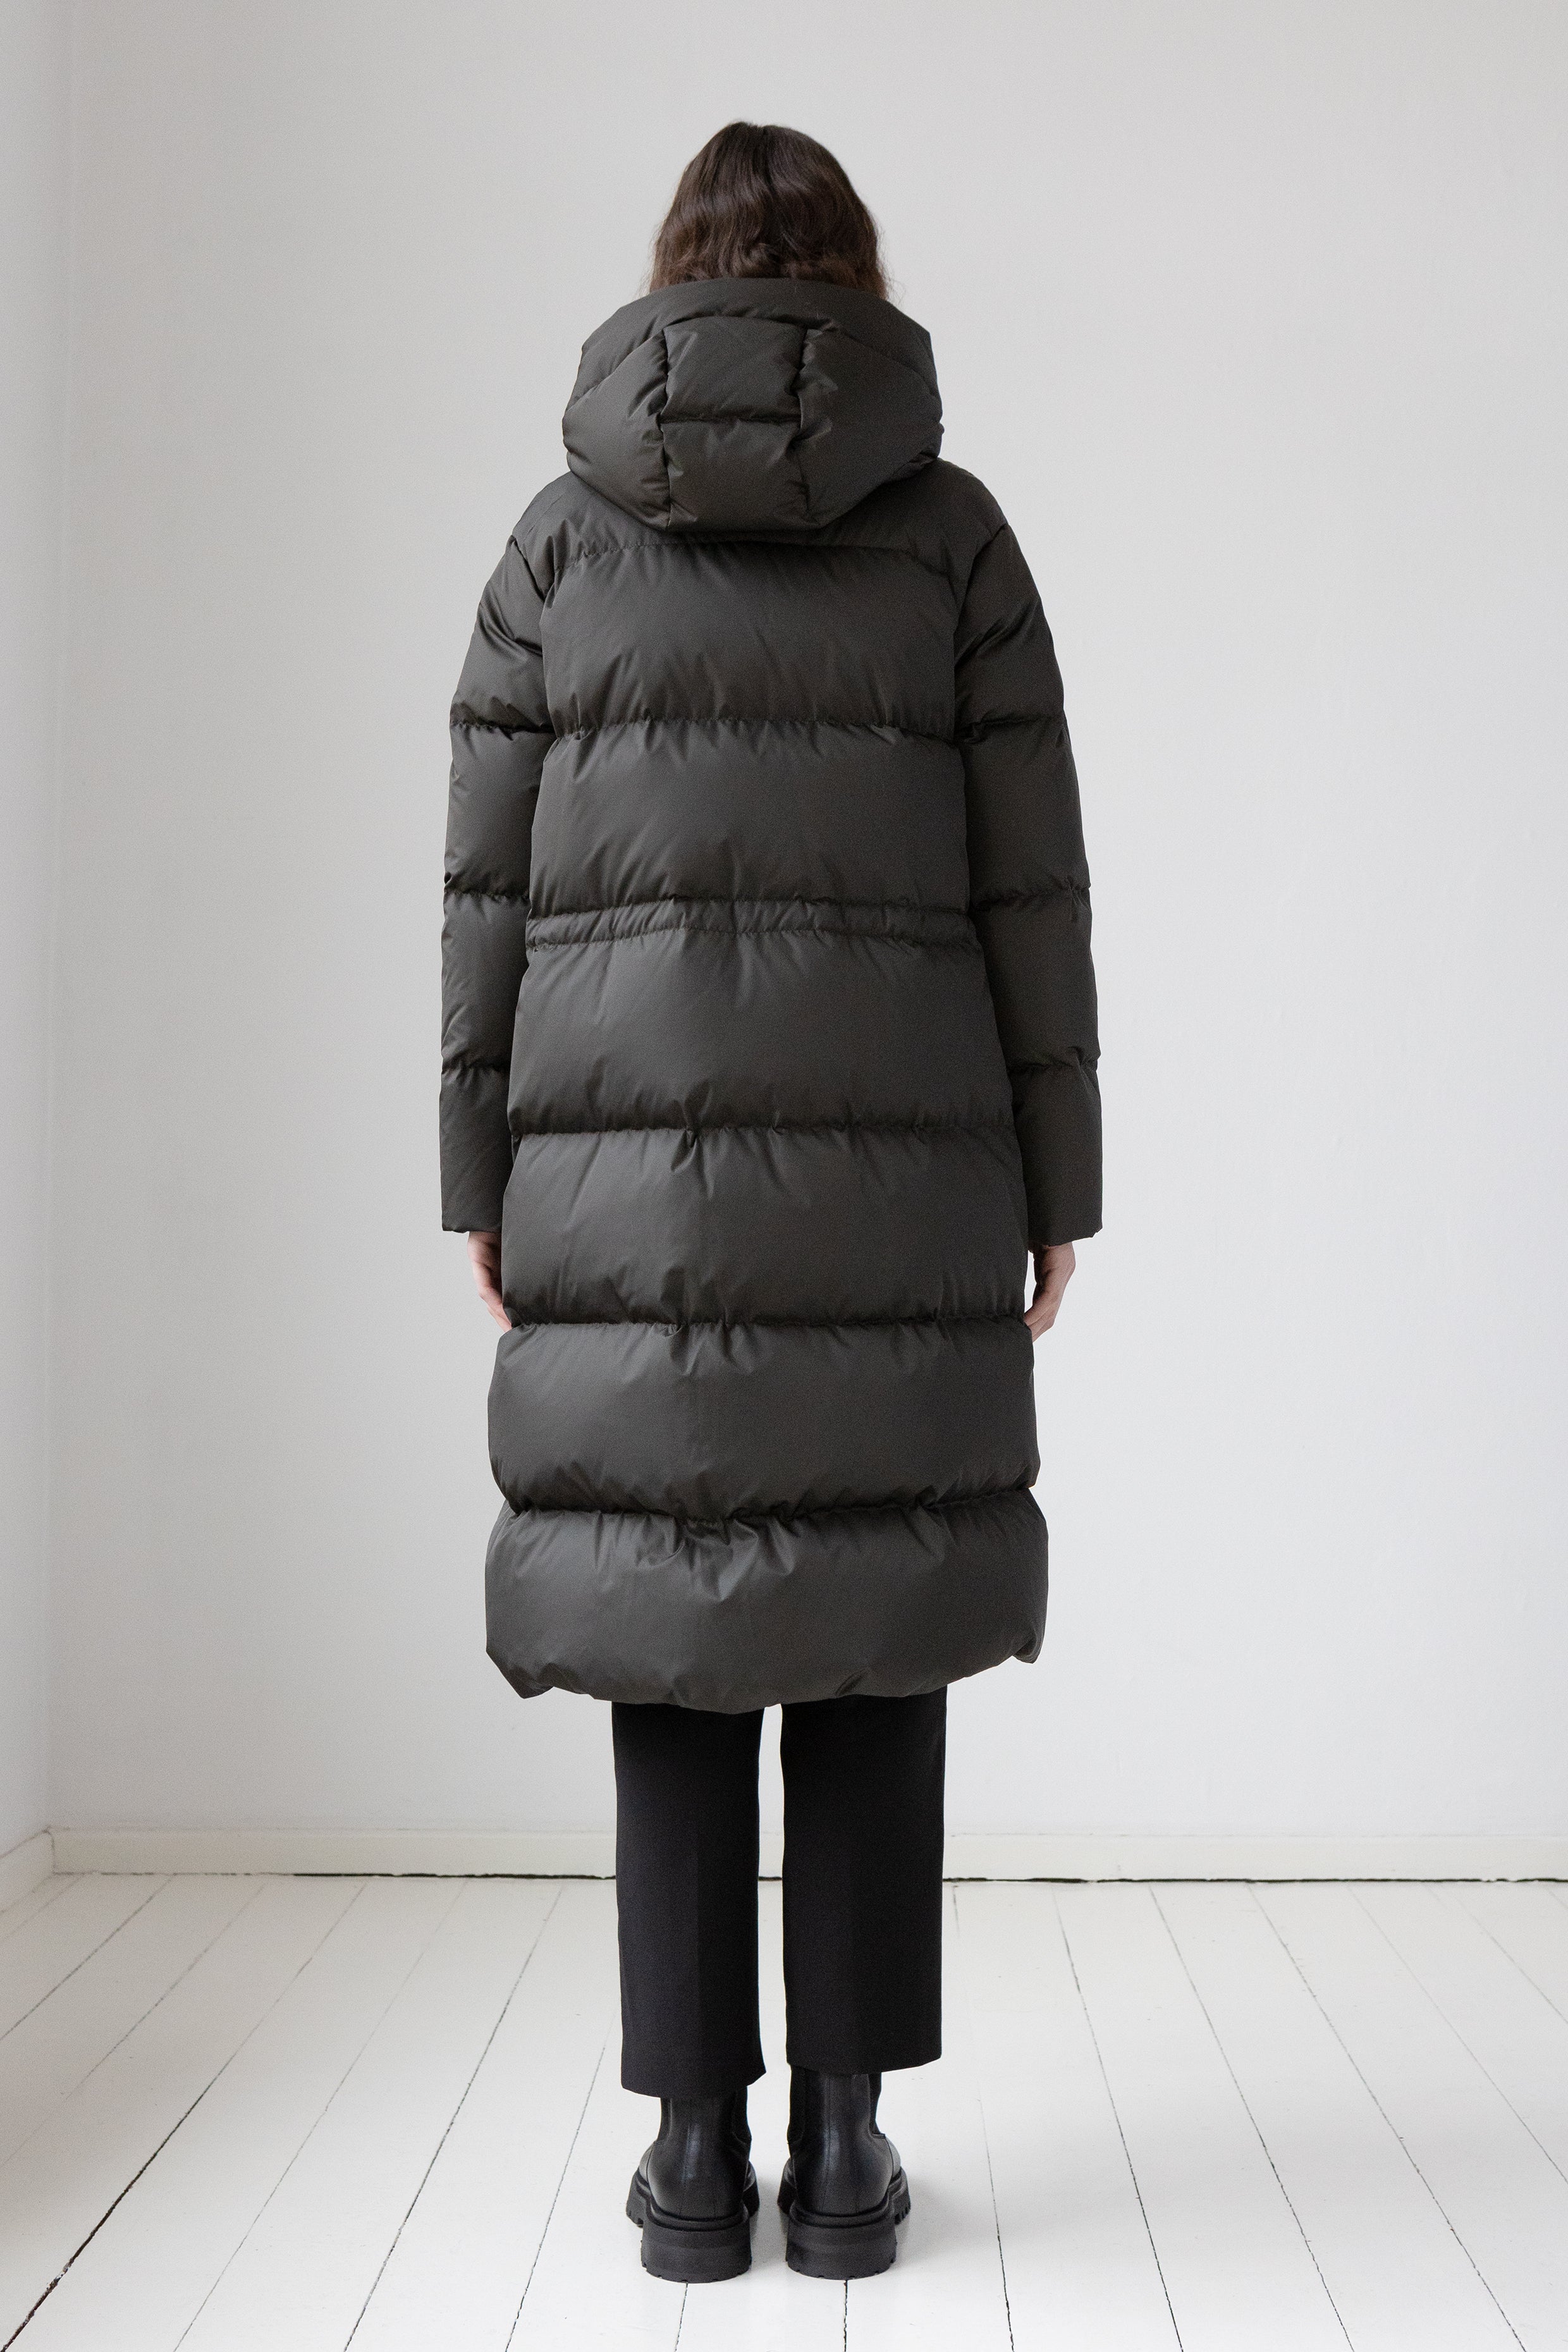 Long Lempelius Downcoat with a slim silhouette